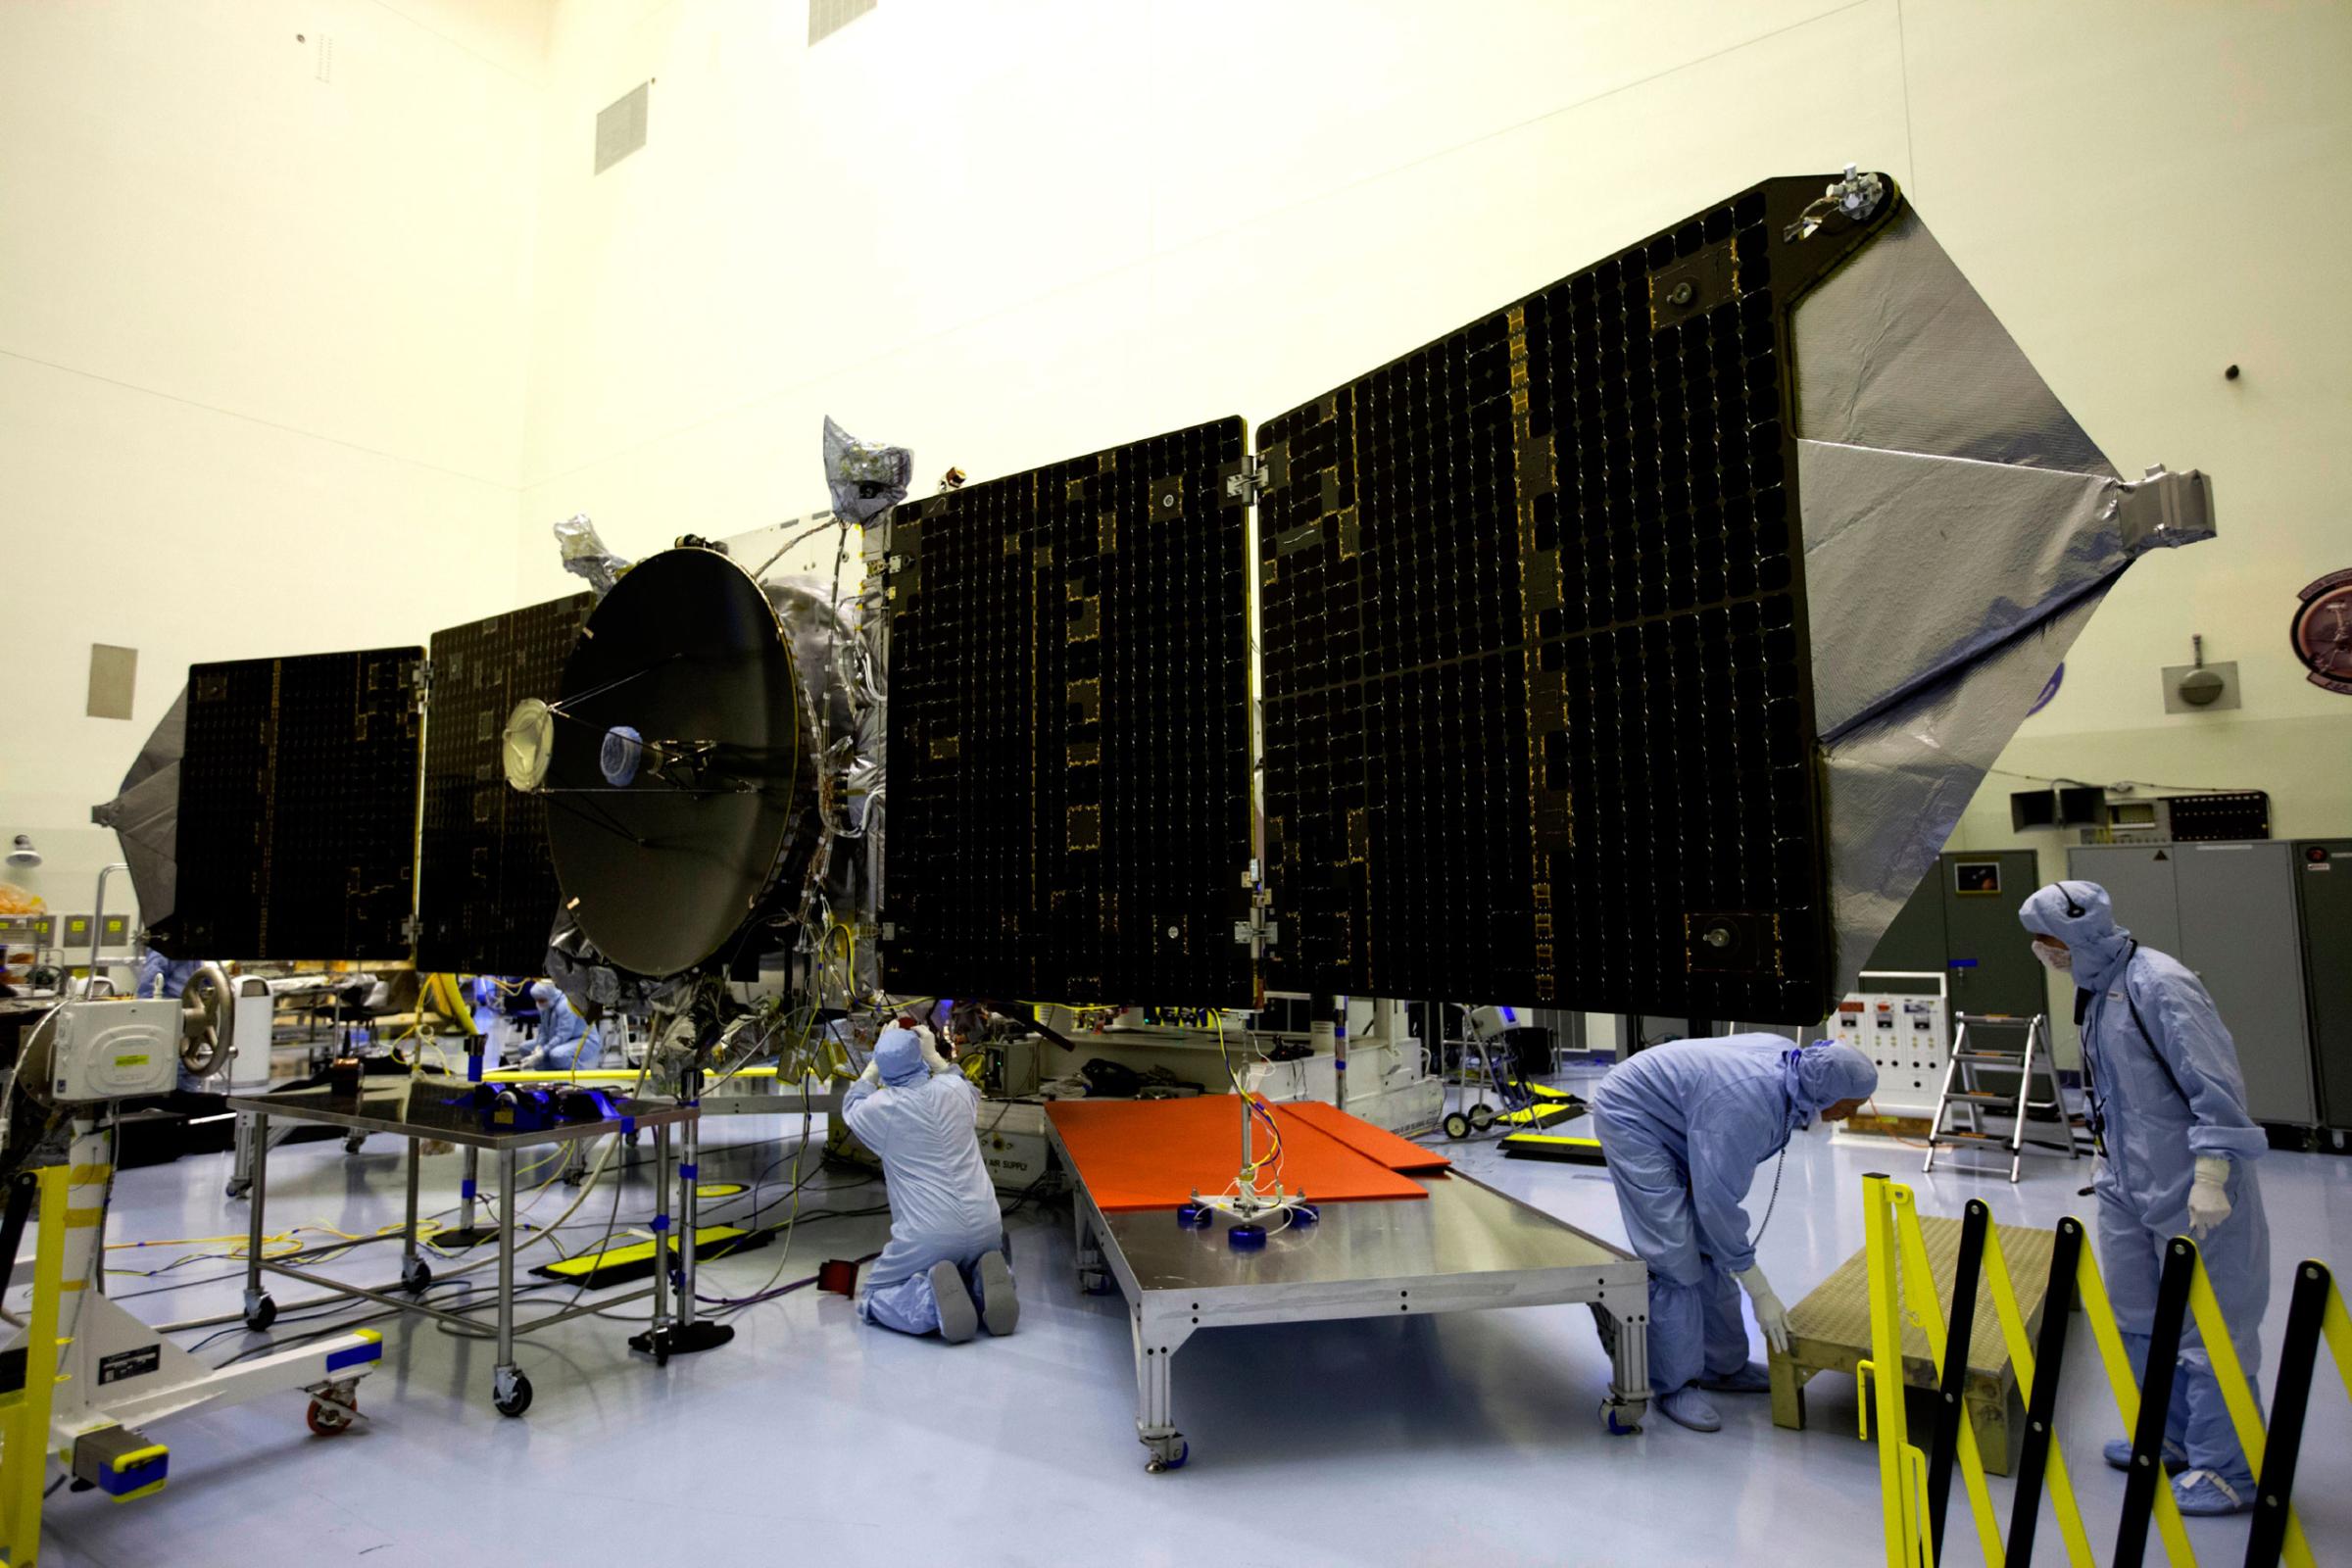 Engineers and technicians test deploy the twin solar arrays on the Mars Atmosphere and Volatile Evolution, or MAVEN, spacecraft at the Payload Hazardous Servicing Facility at NASA's Kennedy Space Center in Florida on Sept. 23, 2013.